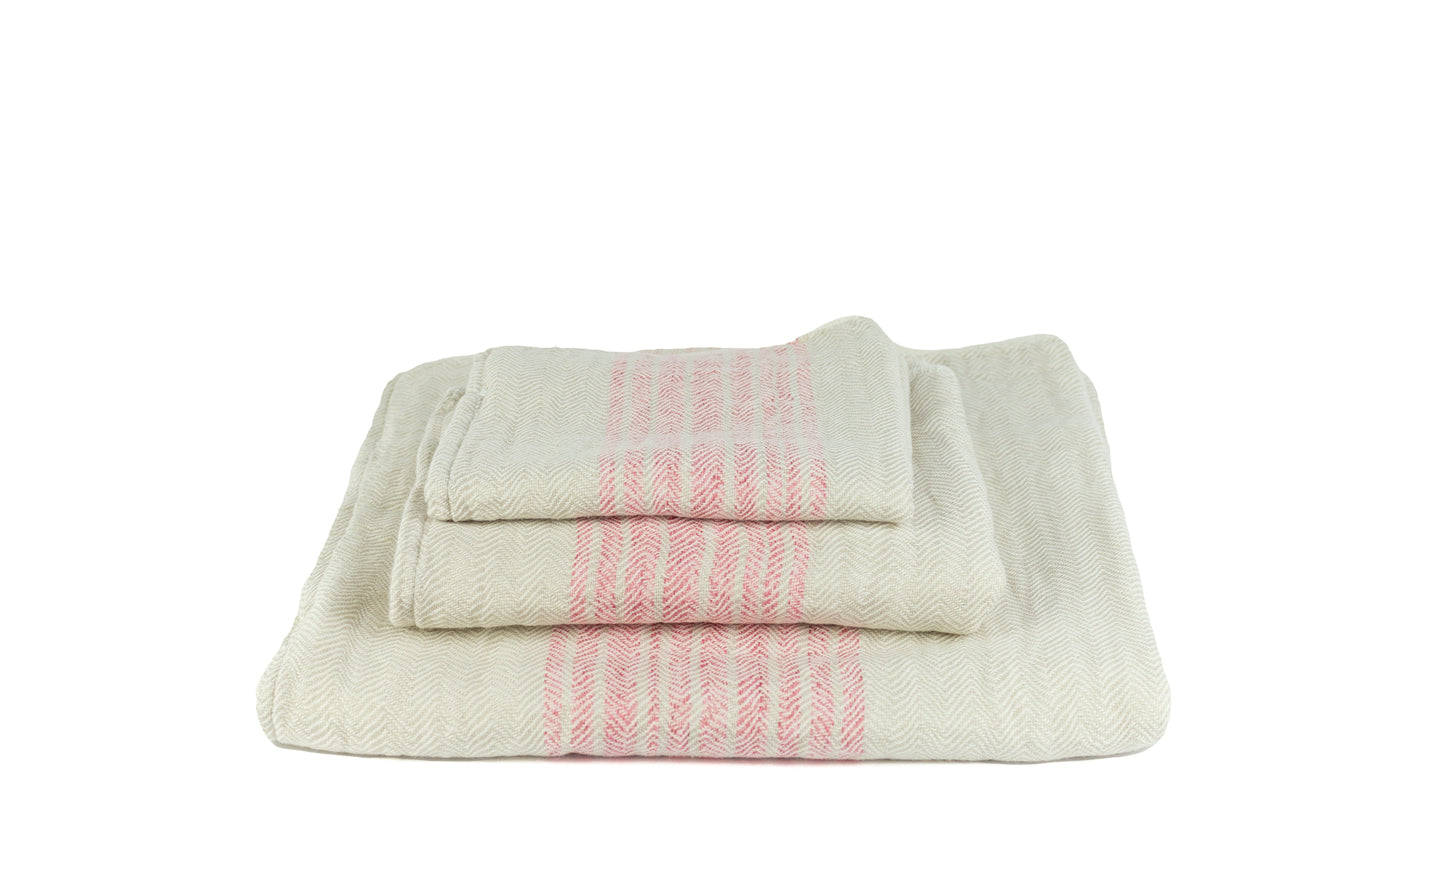 Flax pink creme - Cotton Terry Towel